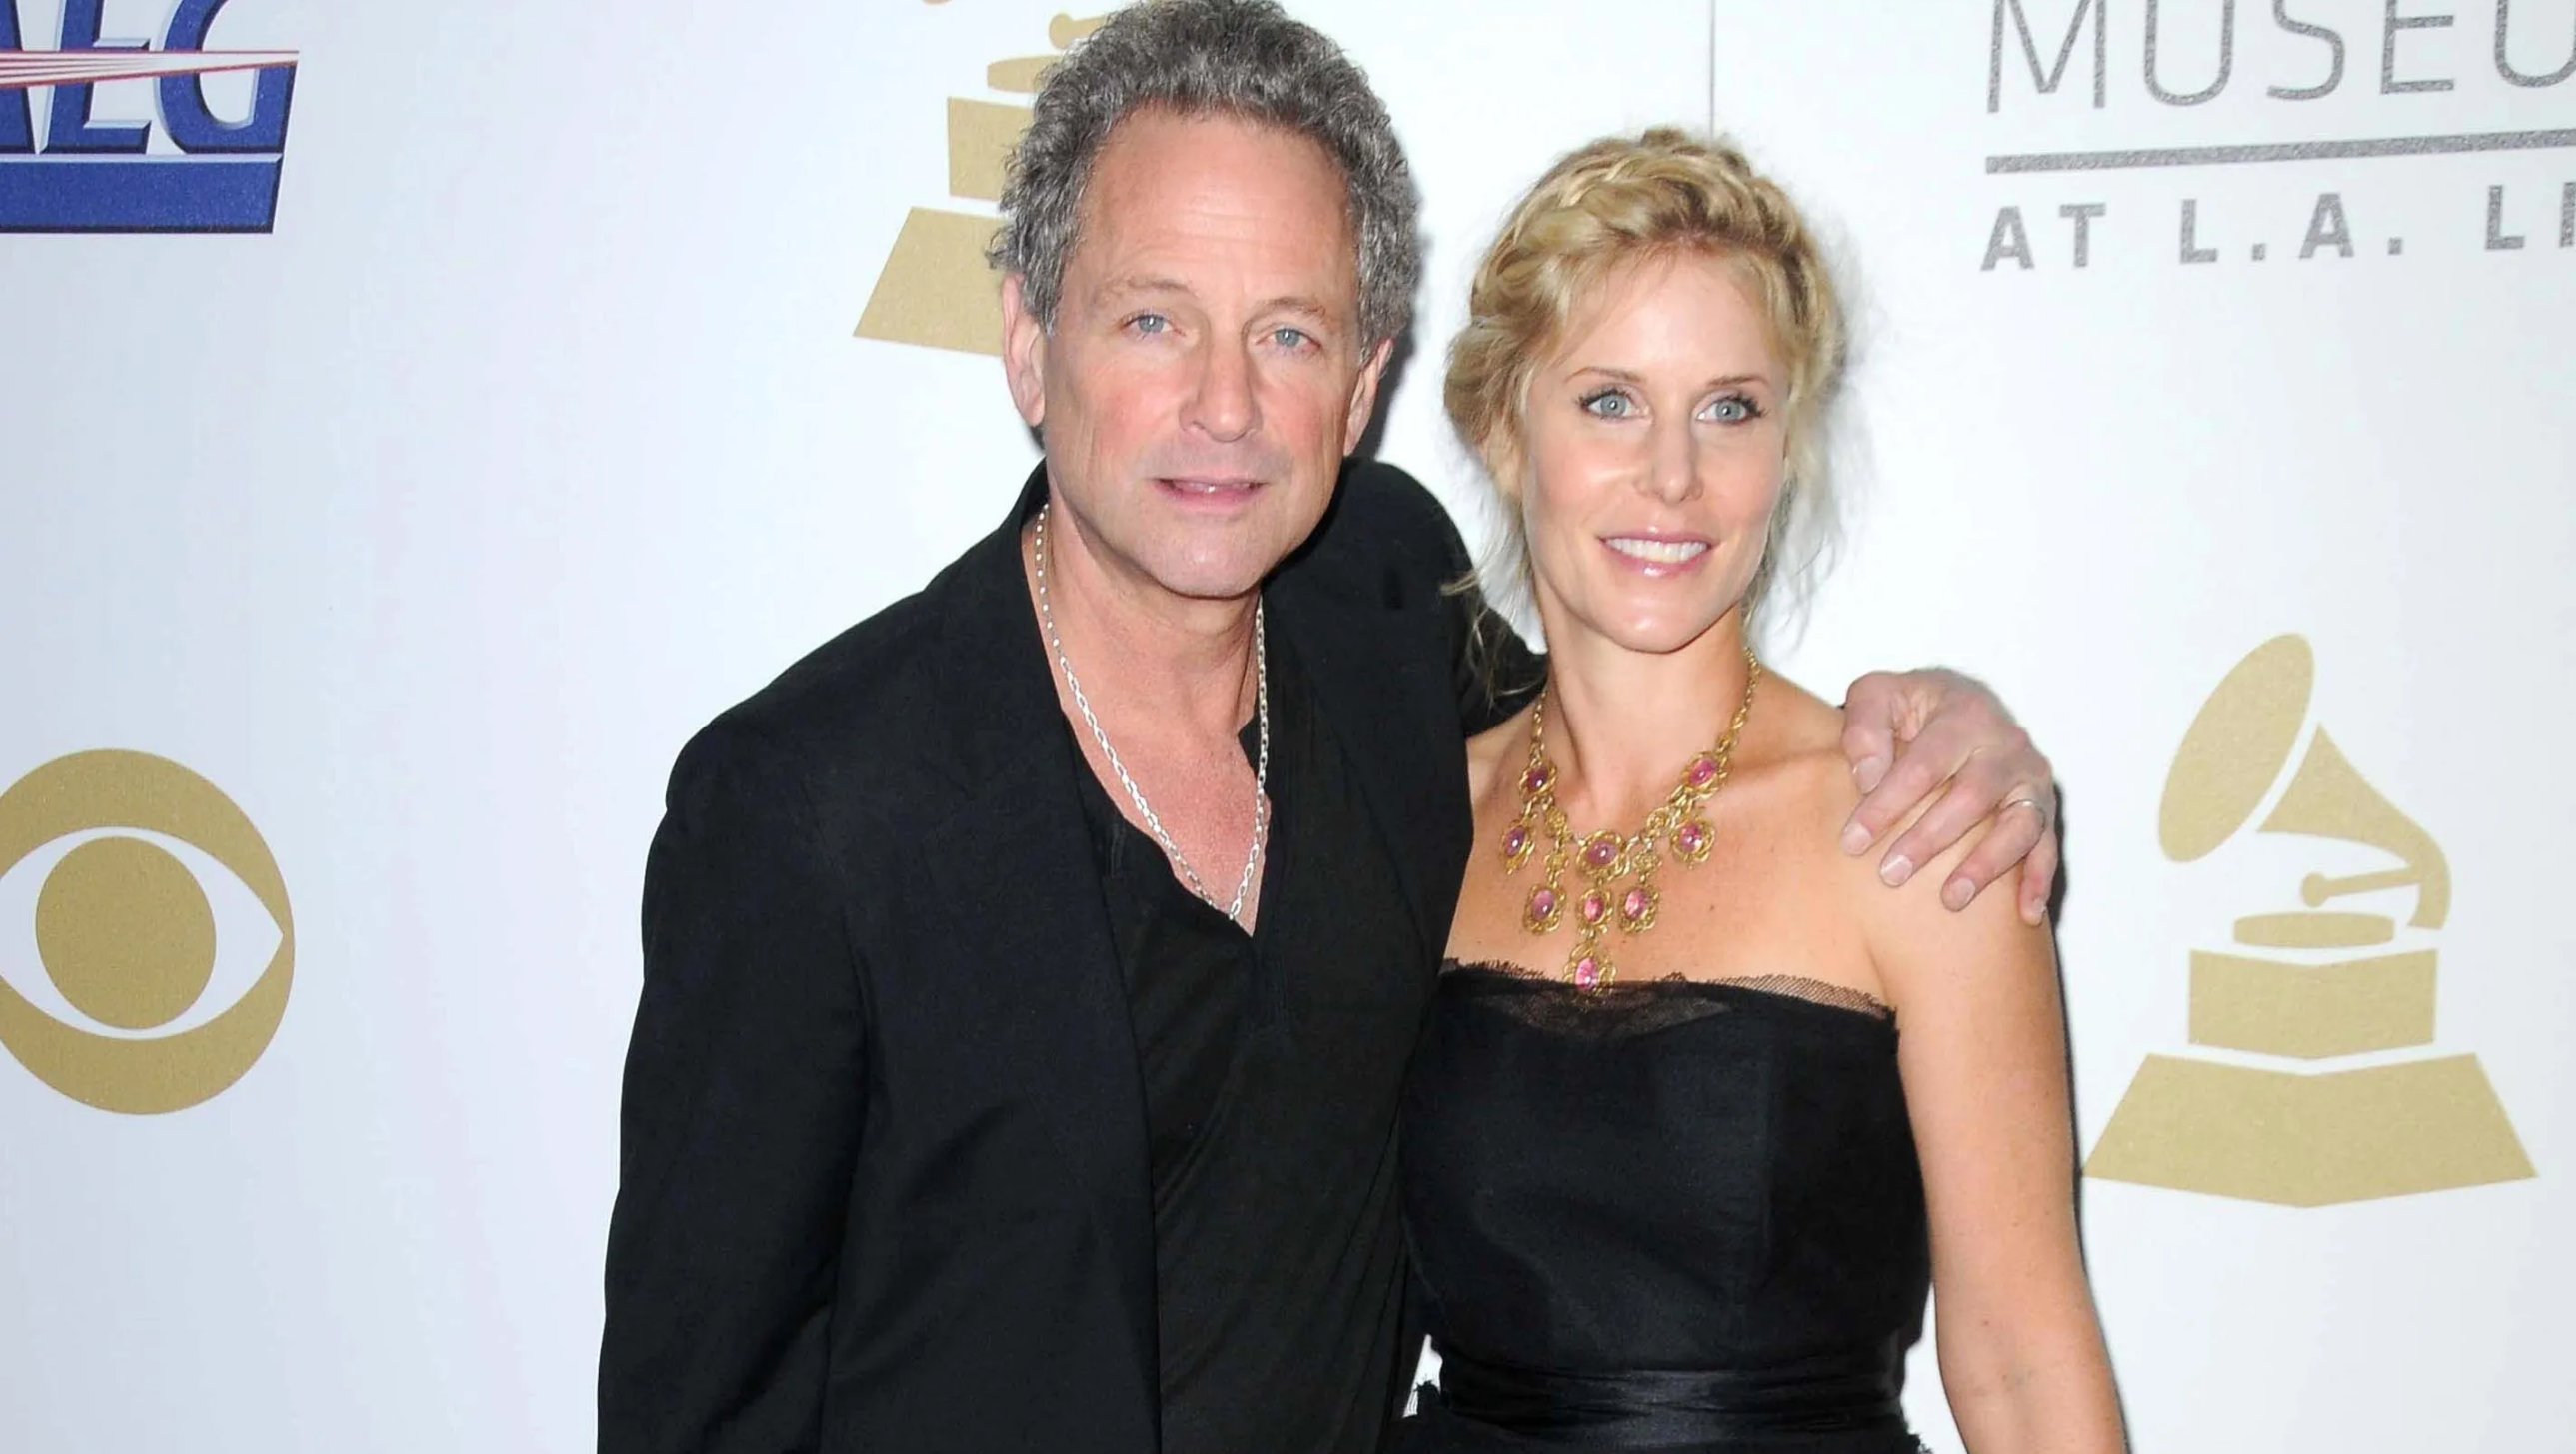 ‘Fleetwood Mac’ Star Lindsey Buckingham’s Wife Files For Divorce After 21 Years of Marriage